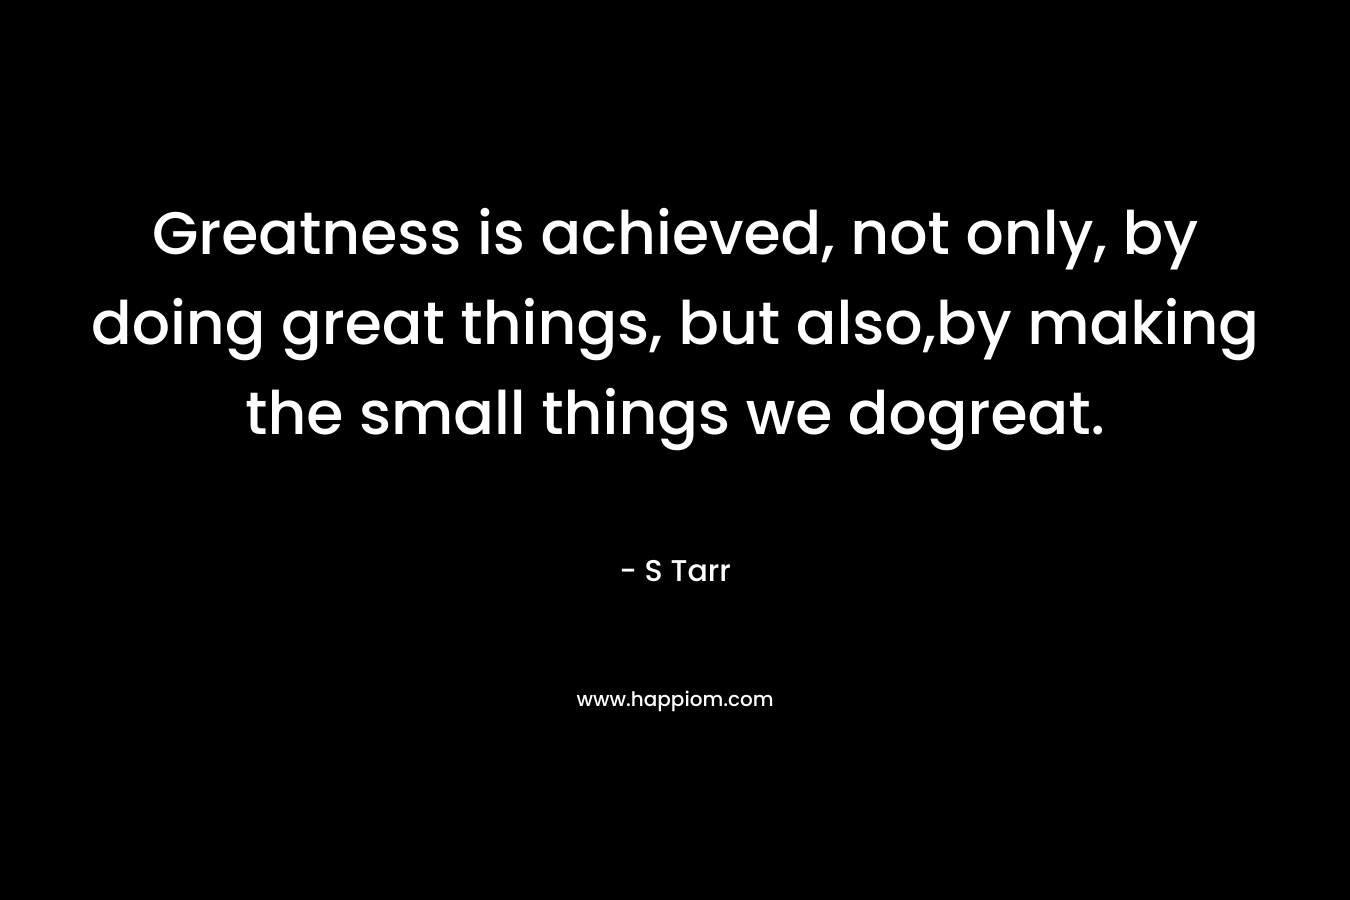 Greatness is achieved, not only, by doing great things, but also,by making the small things we dogreat. – S Tarr